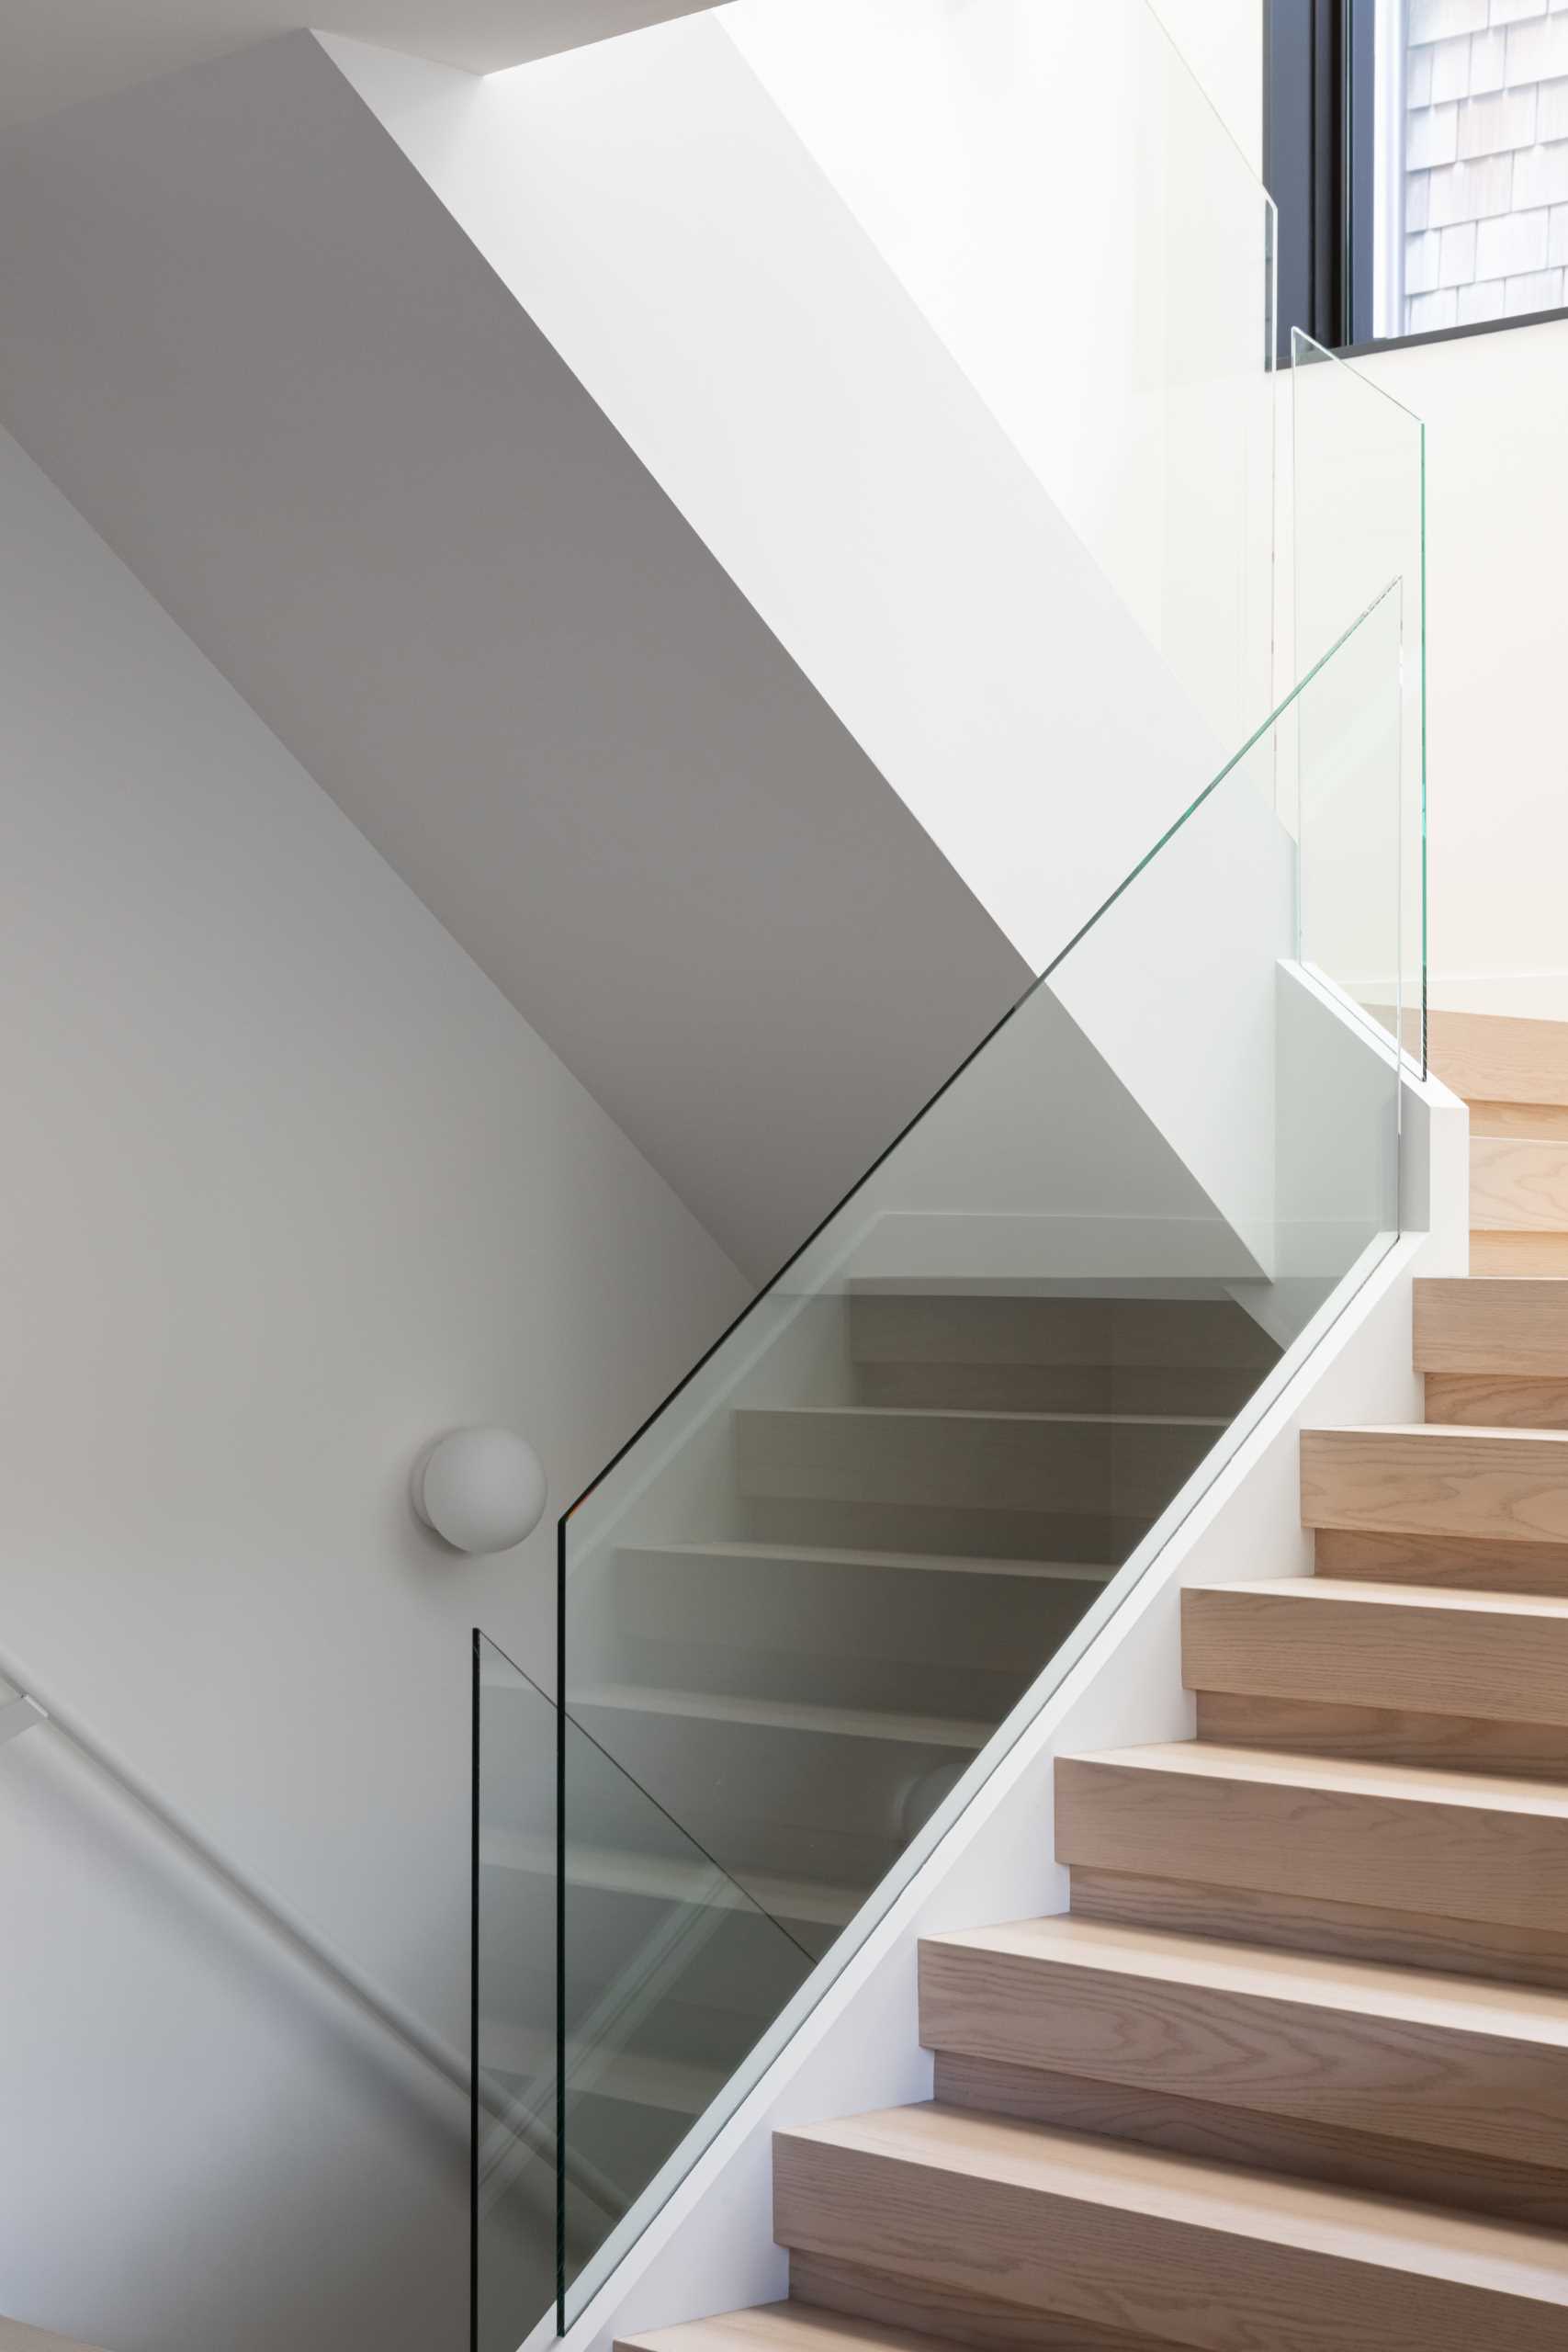 Wood stairs with a glass railing connect the various levels of this modern home.